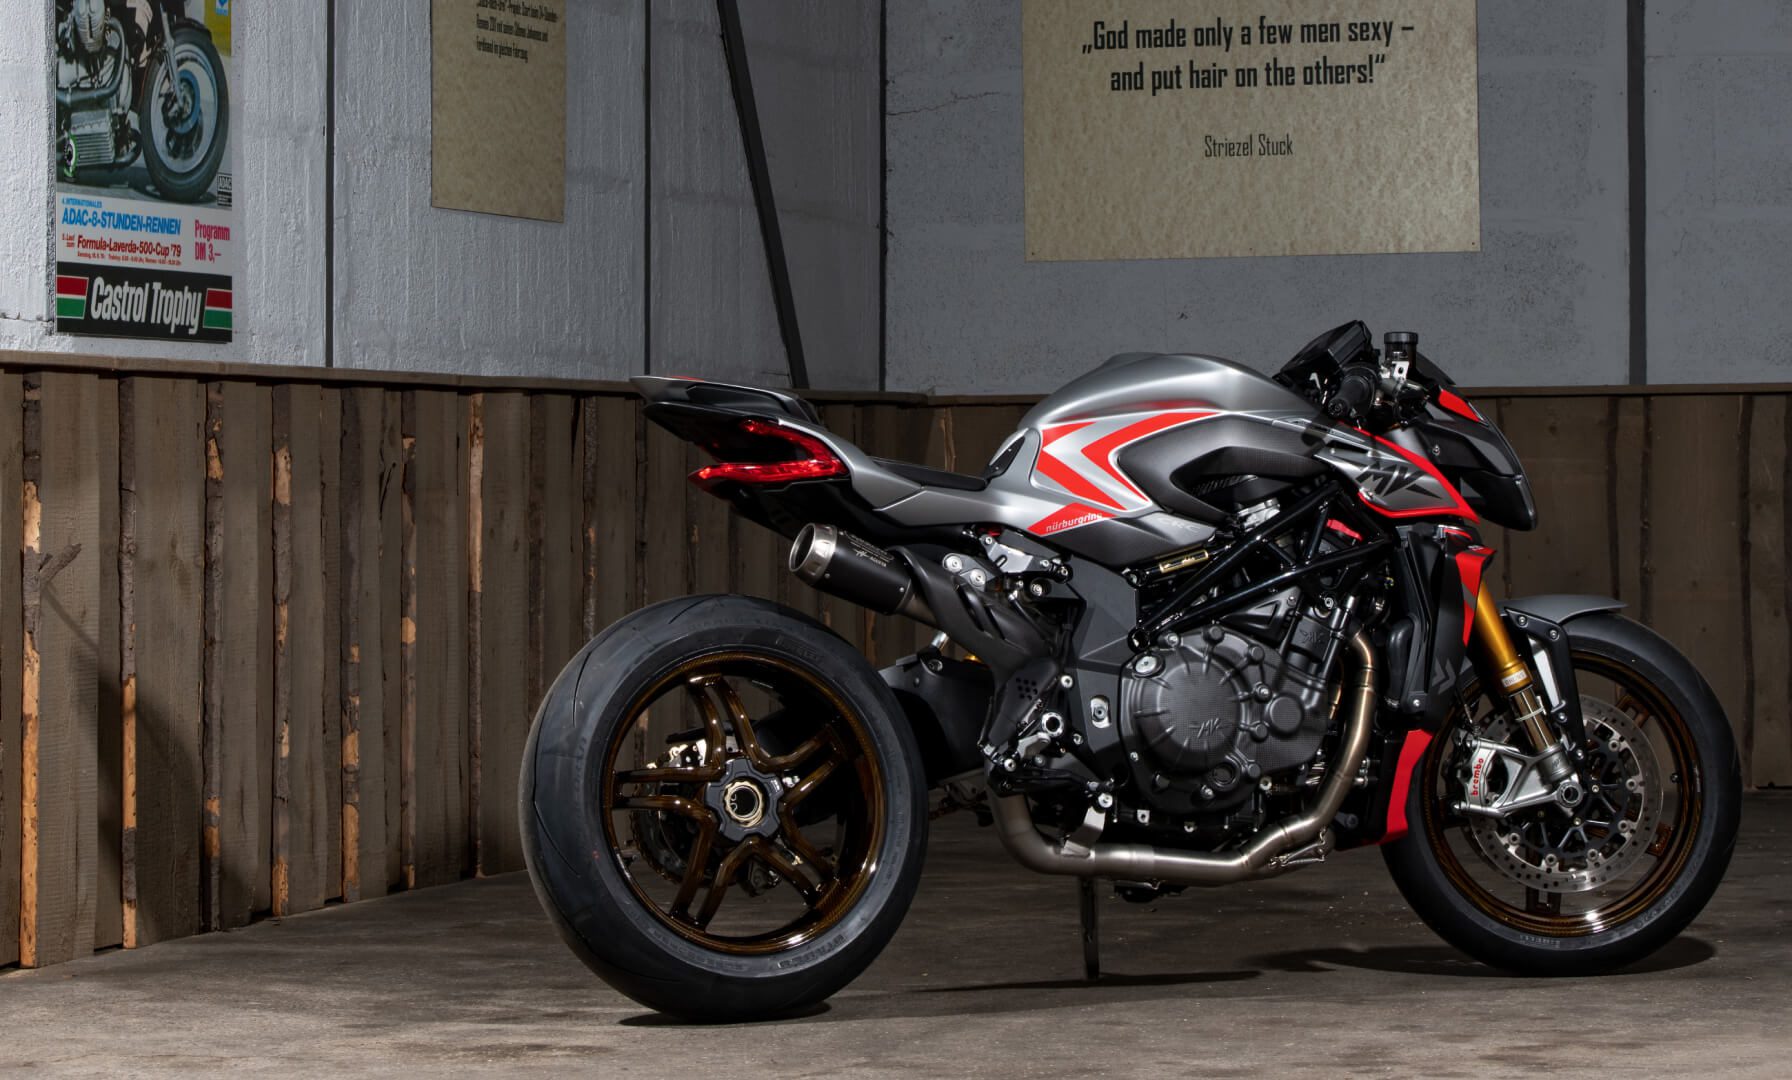 A rear static of the MV Agusta Brutale 1000 Nurbugring